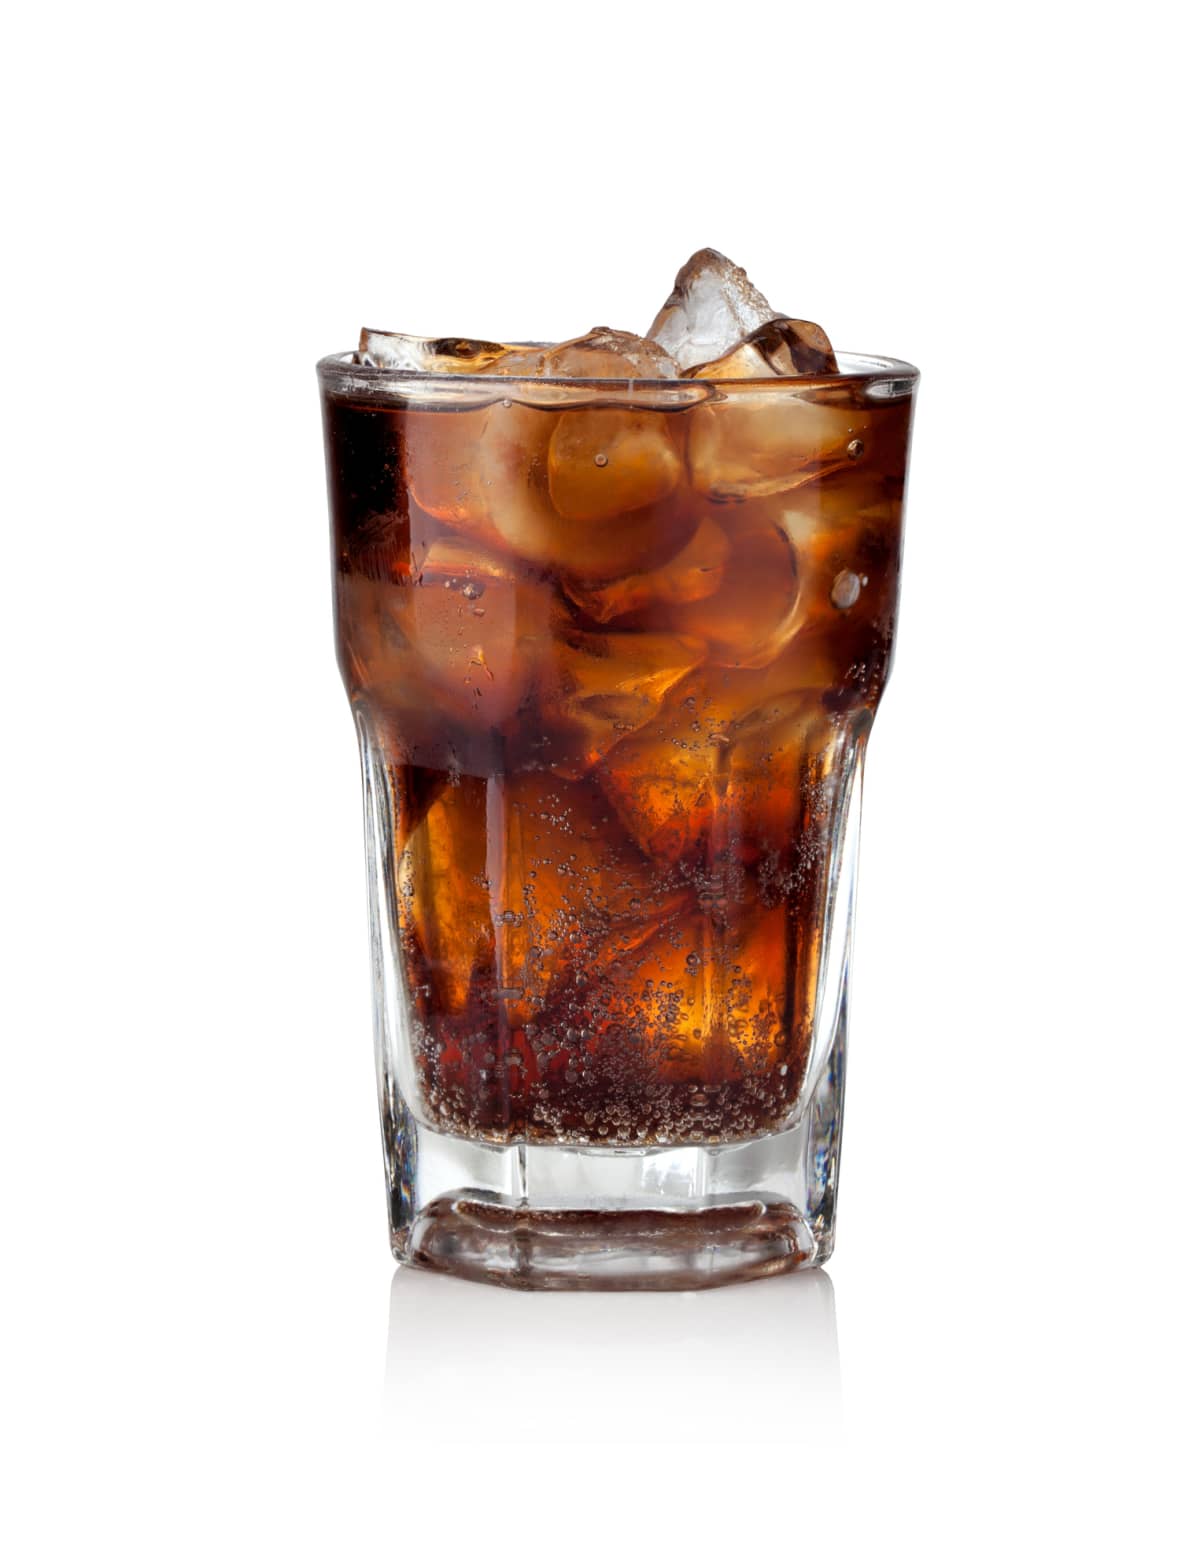 Cola glass with ice cubes on a white background